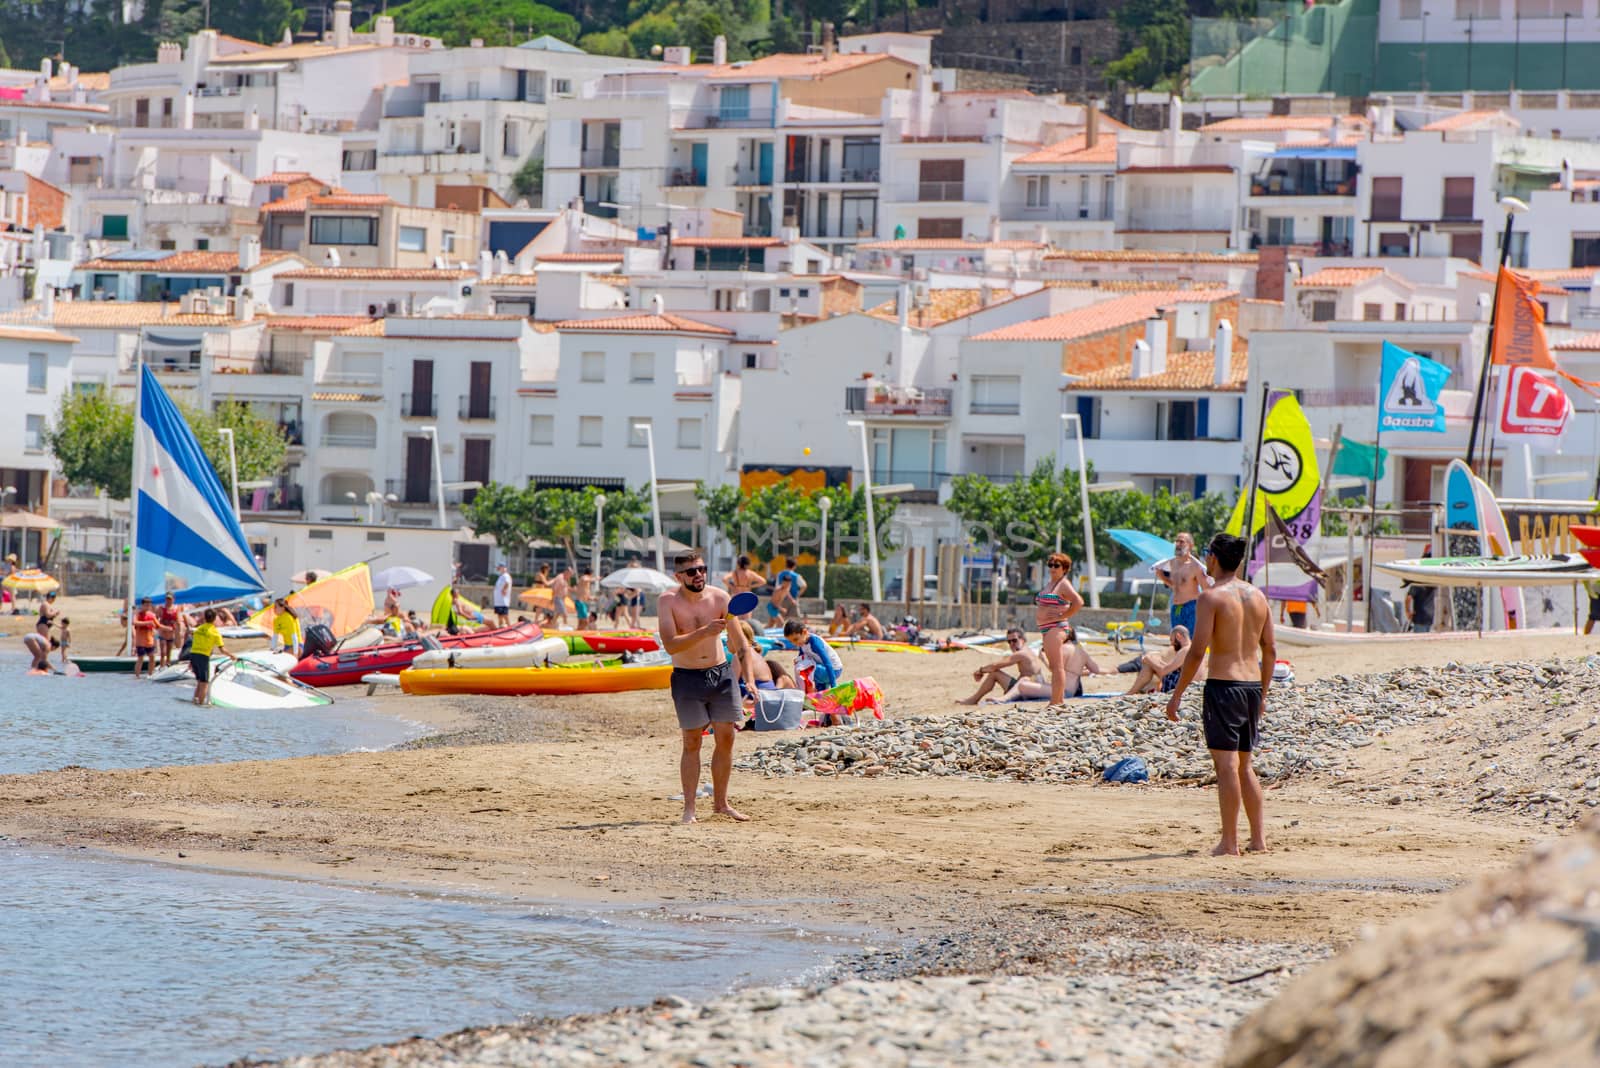 People in the beach of Port de la Selva, one of the most tourist by martinscphoto